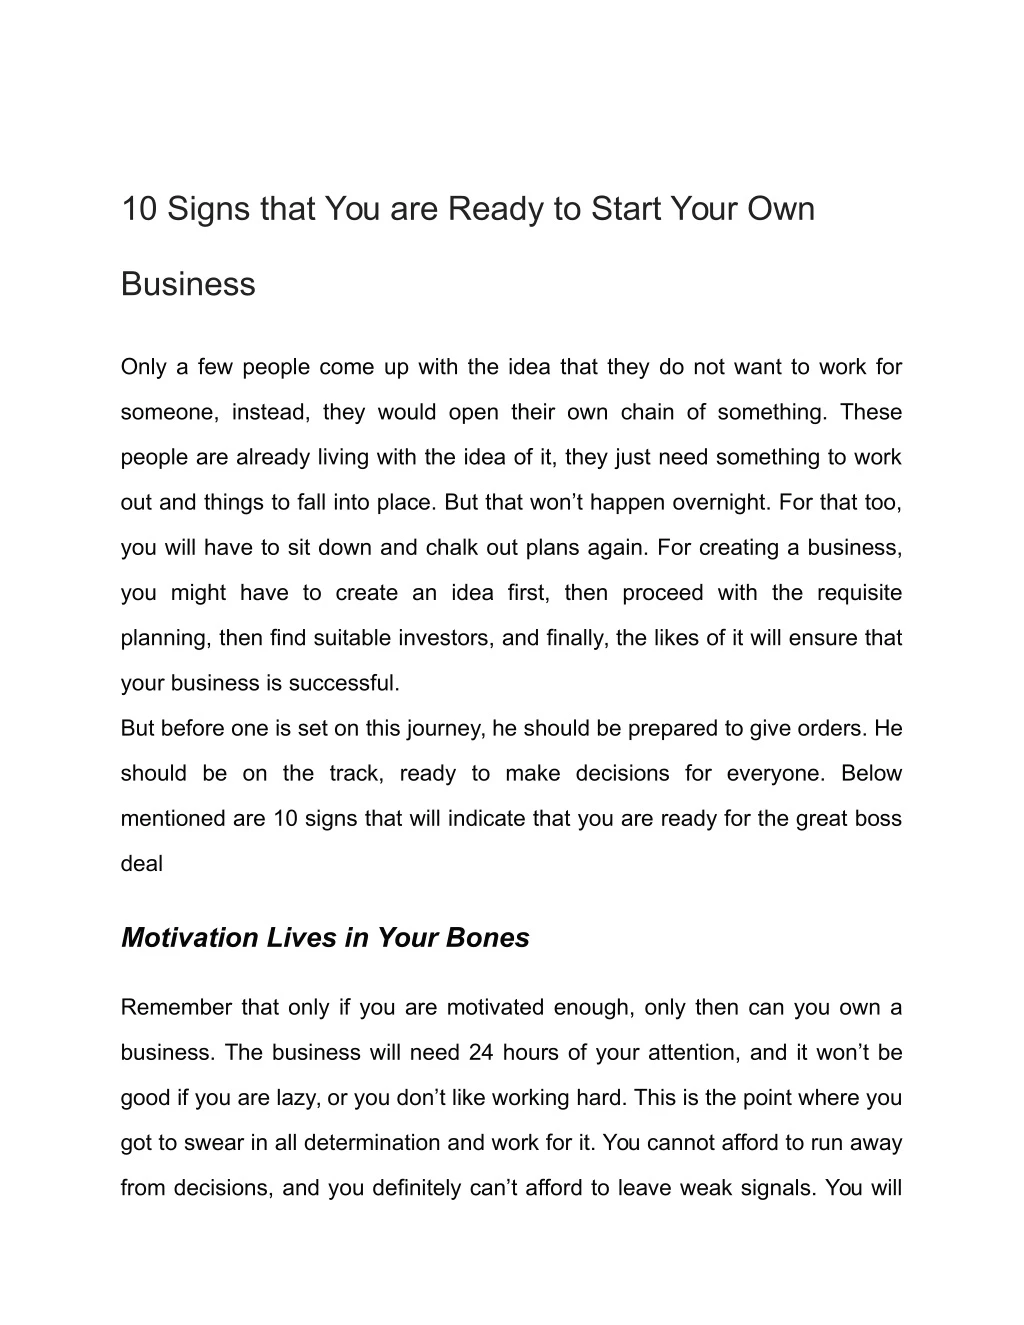 10 signs that you are ready to start your own